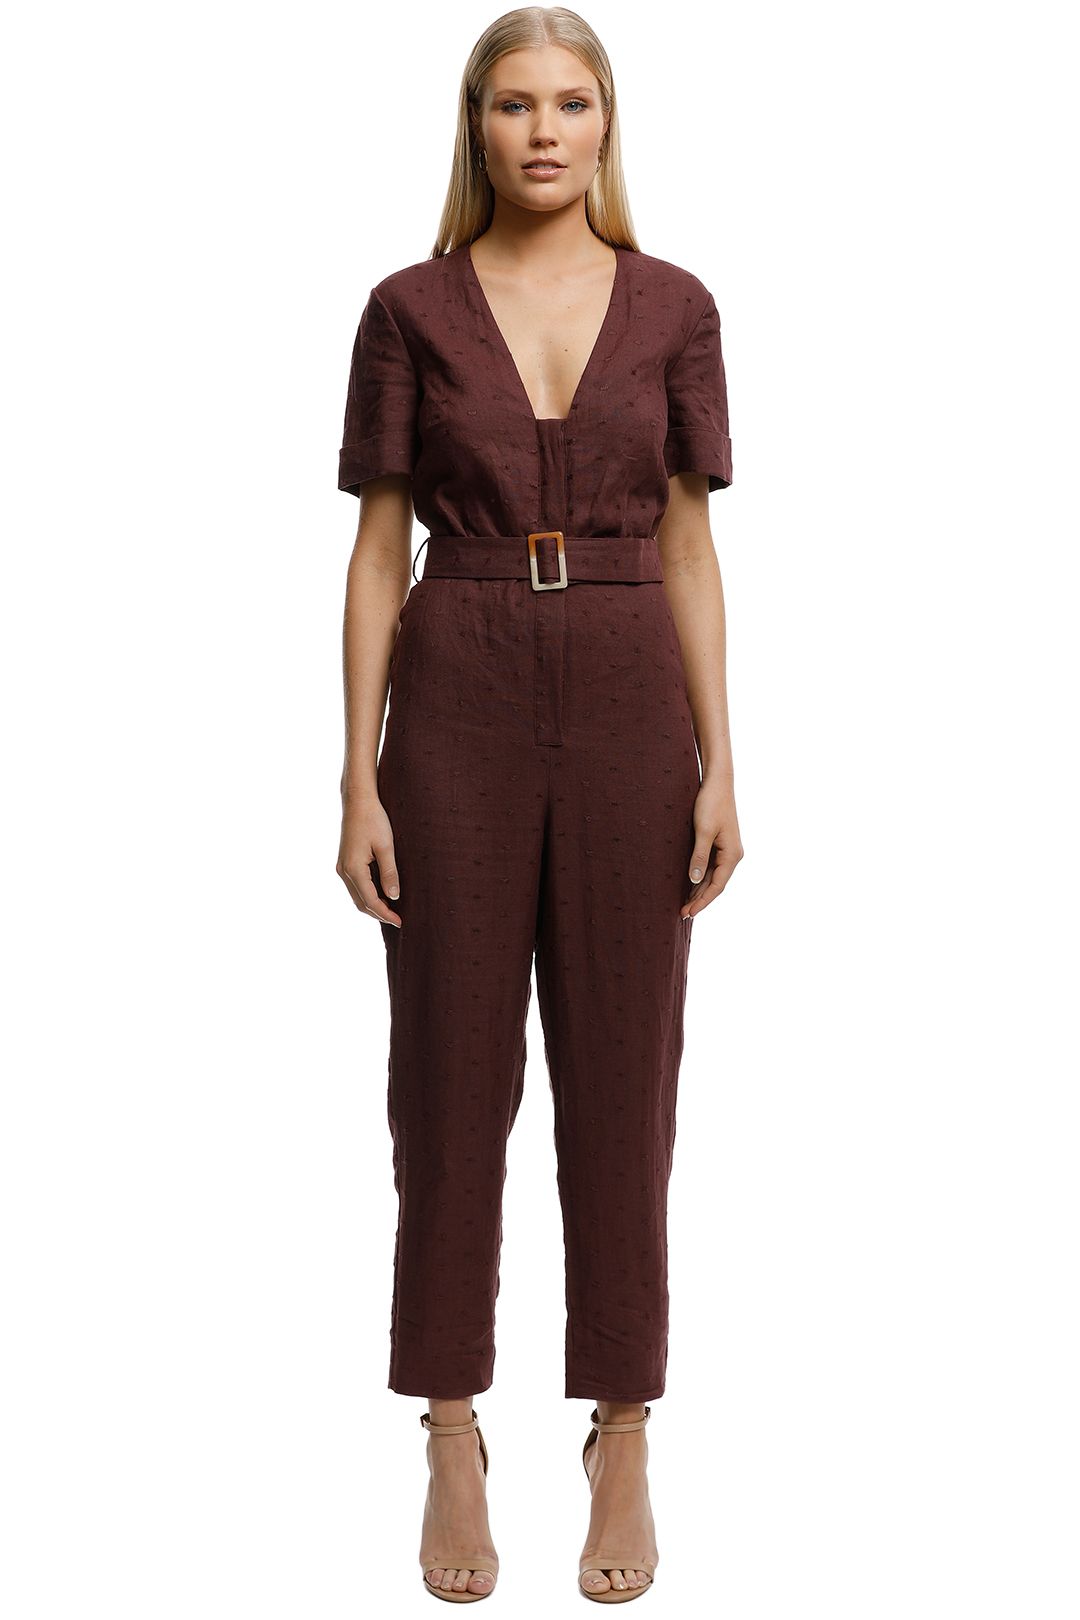 Stevie-May-Fia-Jumpsuit-Wine-Front